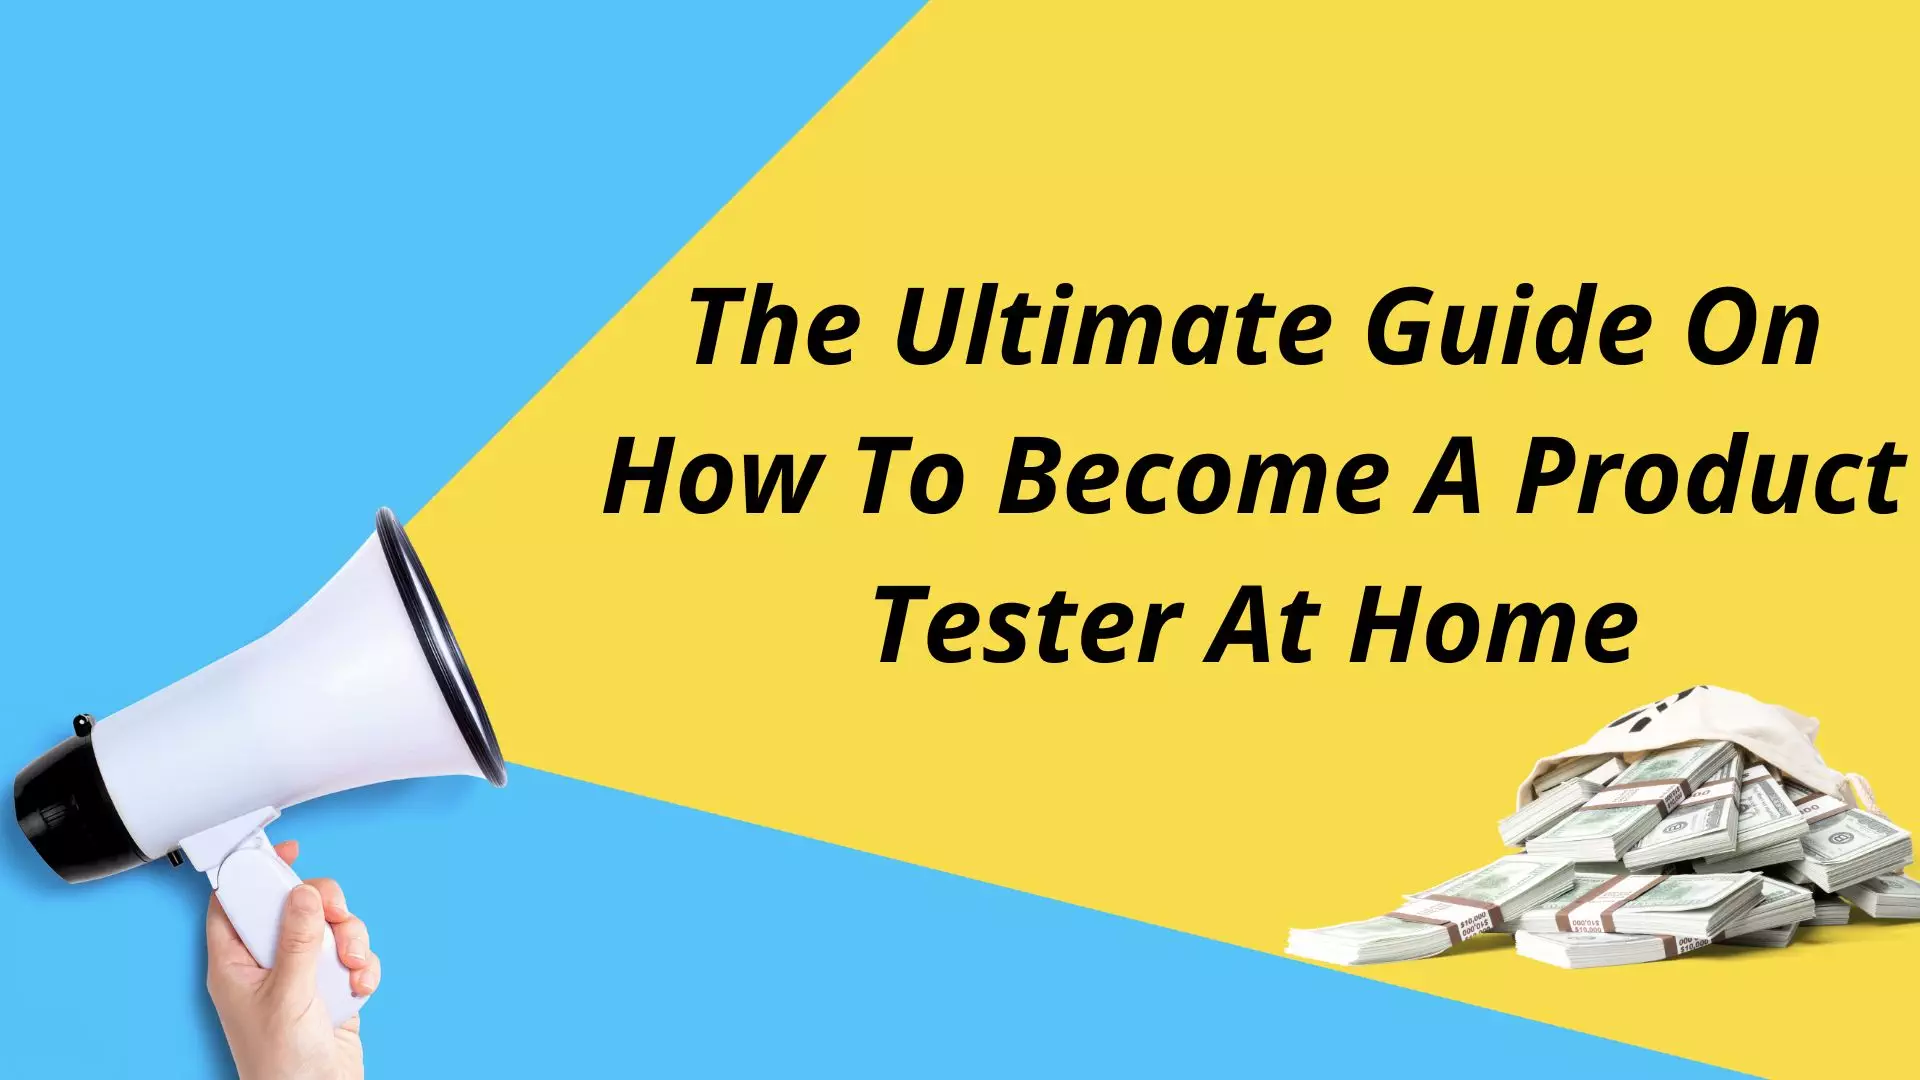 How To Become A Product Tester At Home – The Ultimate Guide